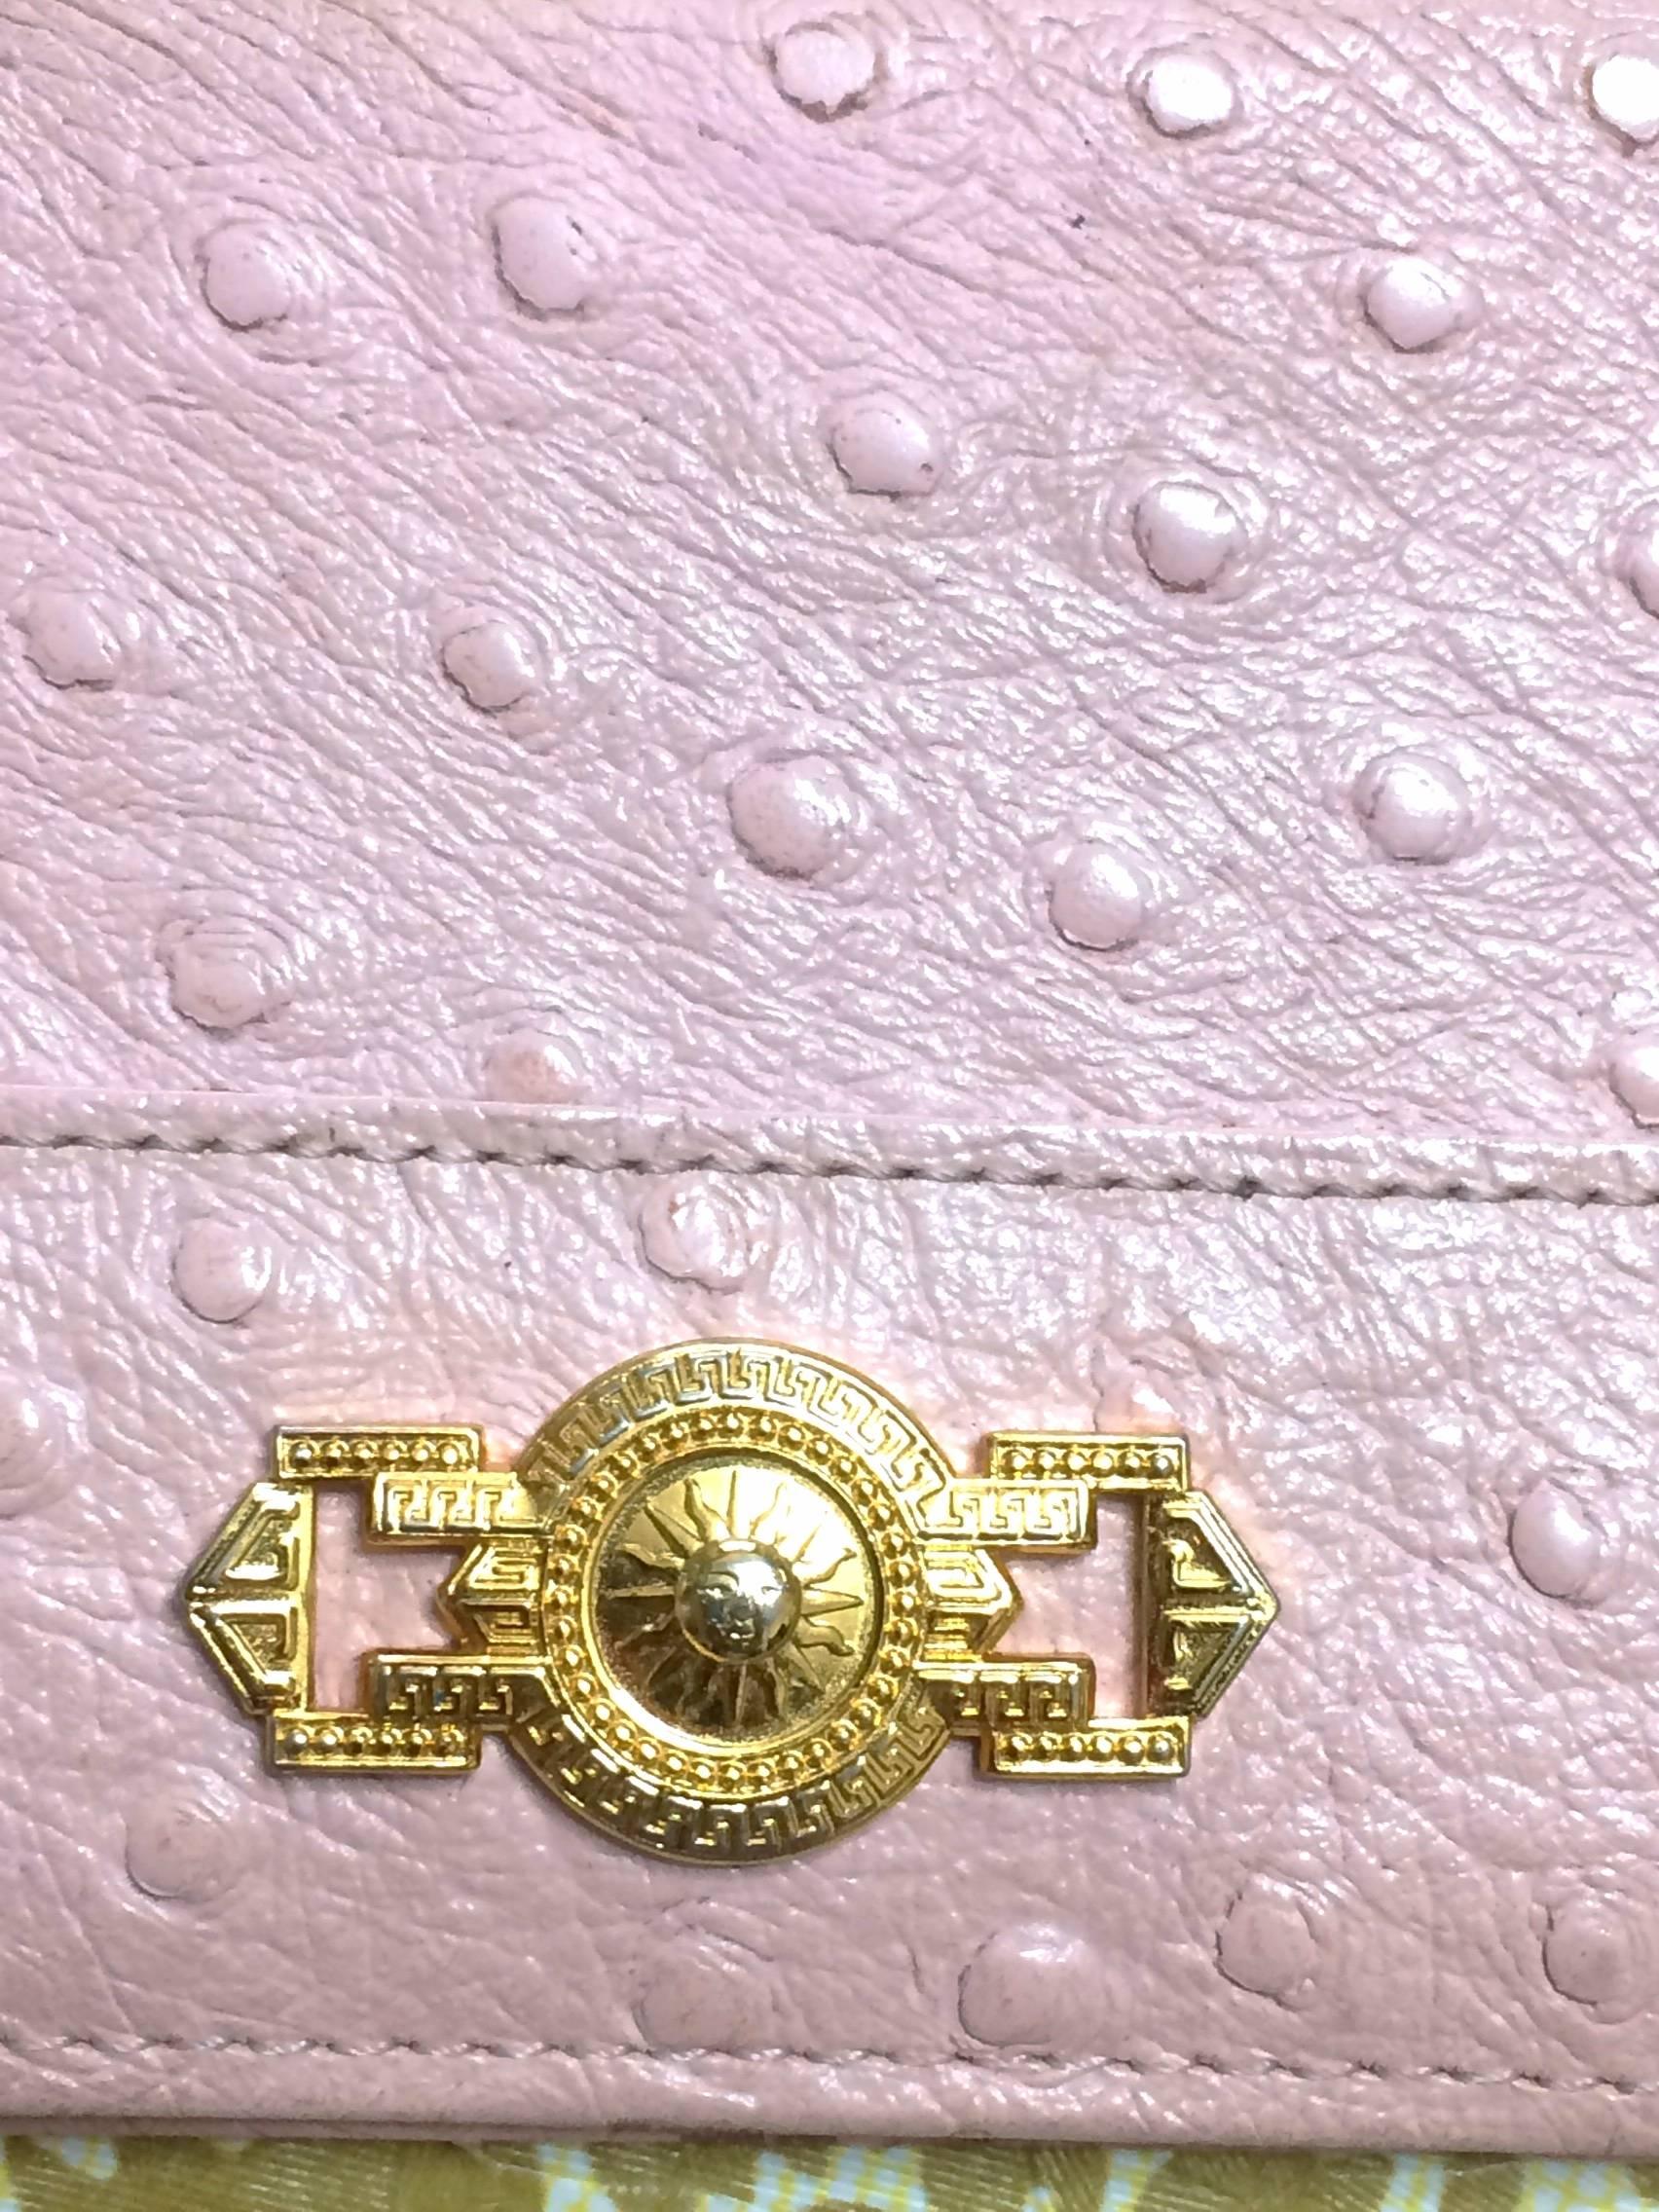 1990s. Vintage Gianni Versace ostrich-embossed pink leather card, id case, card case with golden sunburst charm. Best gift for Unisex.

Here is another vintage piece from Gianni Versace, ostrich-embossed pink leather card, ID, pass case for unisex